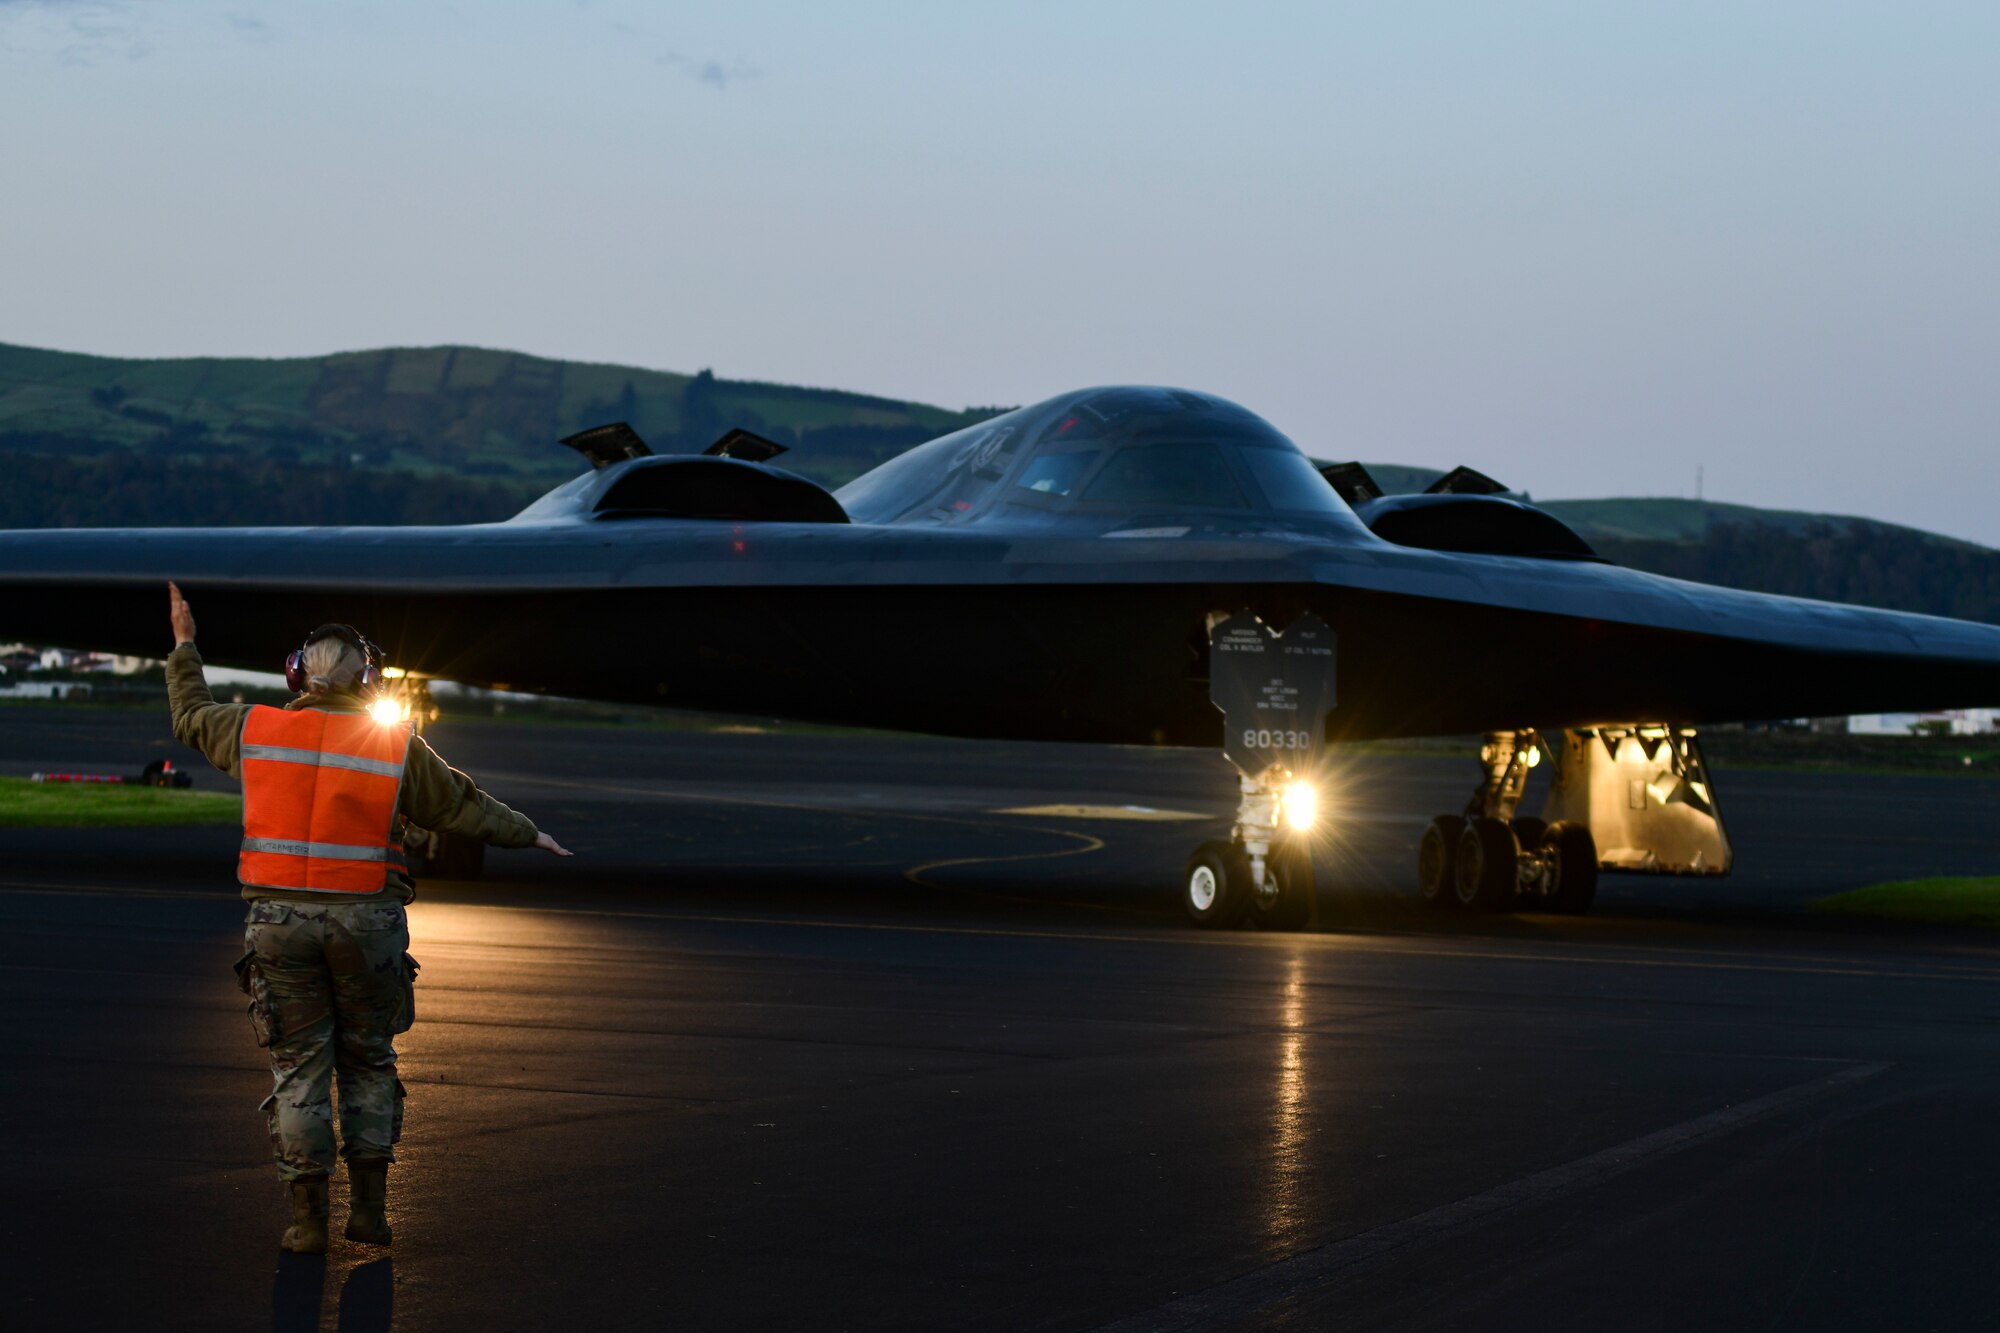 The strategic bomber missions provide Airmen an opportunity to test their rapid response capability, allowing them to meet any potential crisis or challenge across the globe. (U.S. Air Force photo by Tech. Sgt. Heather Salazar)